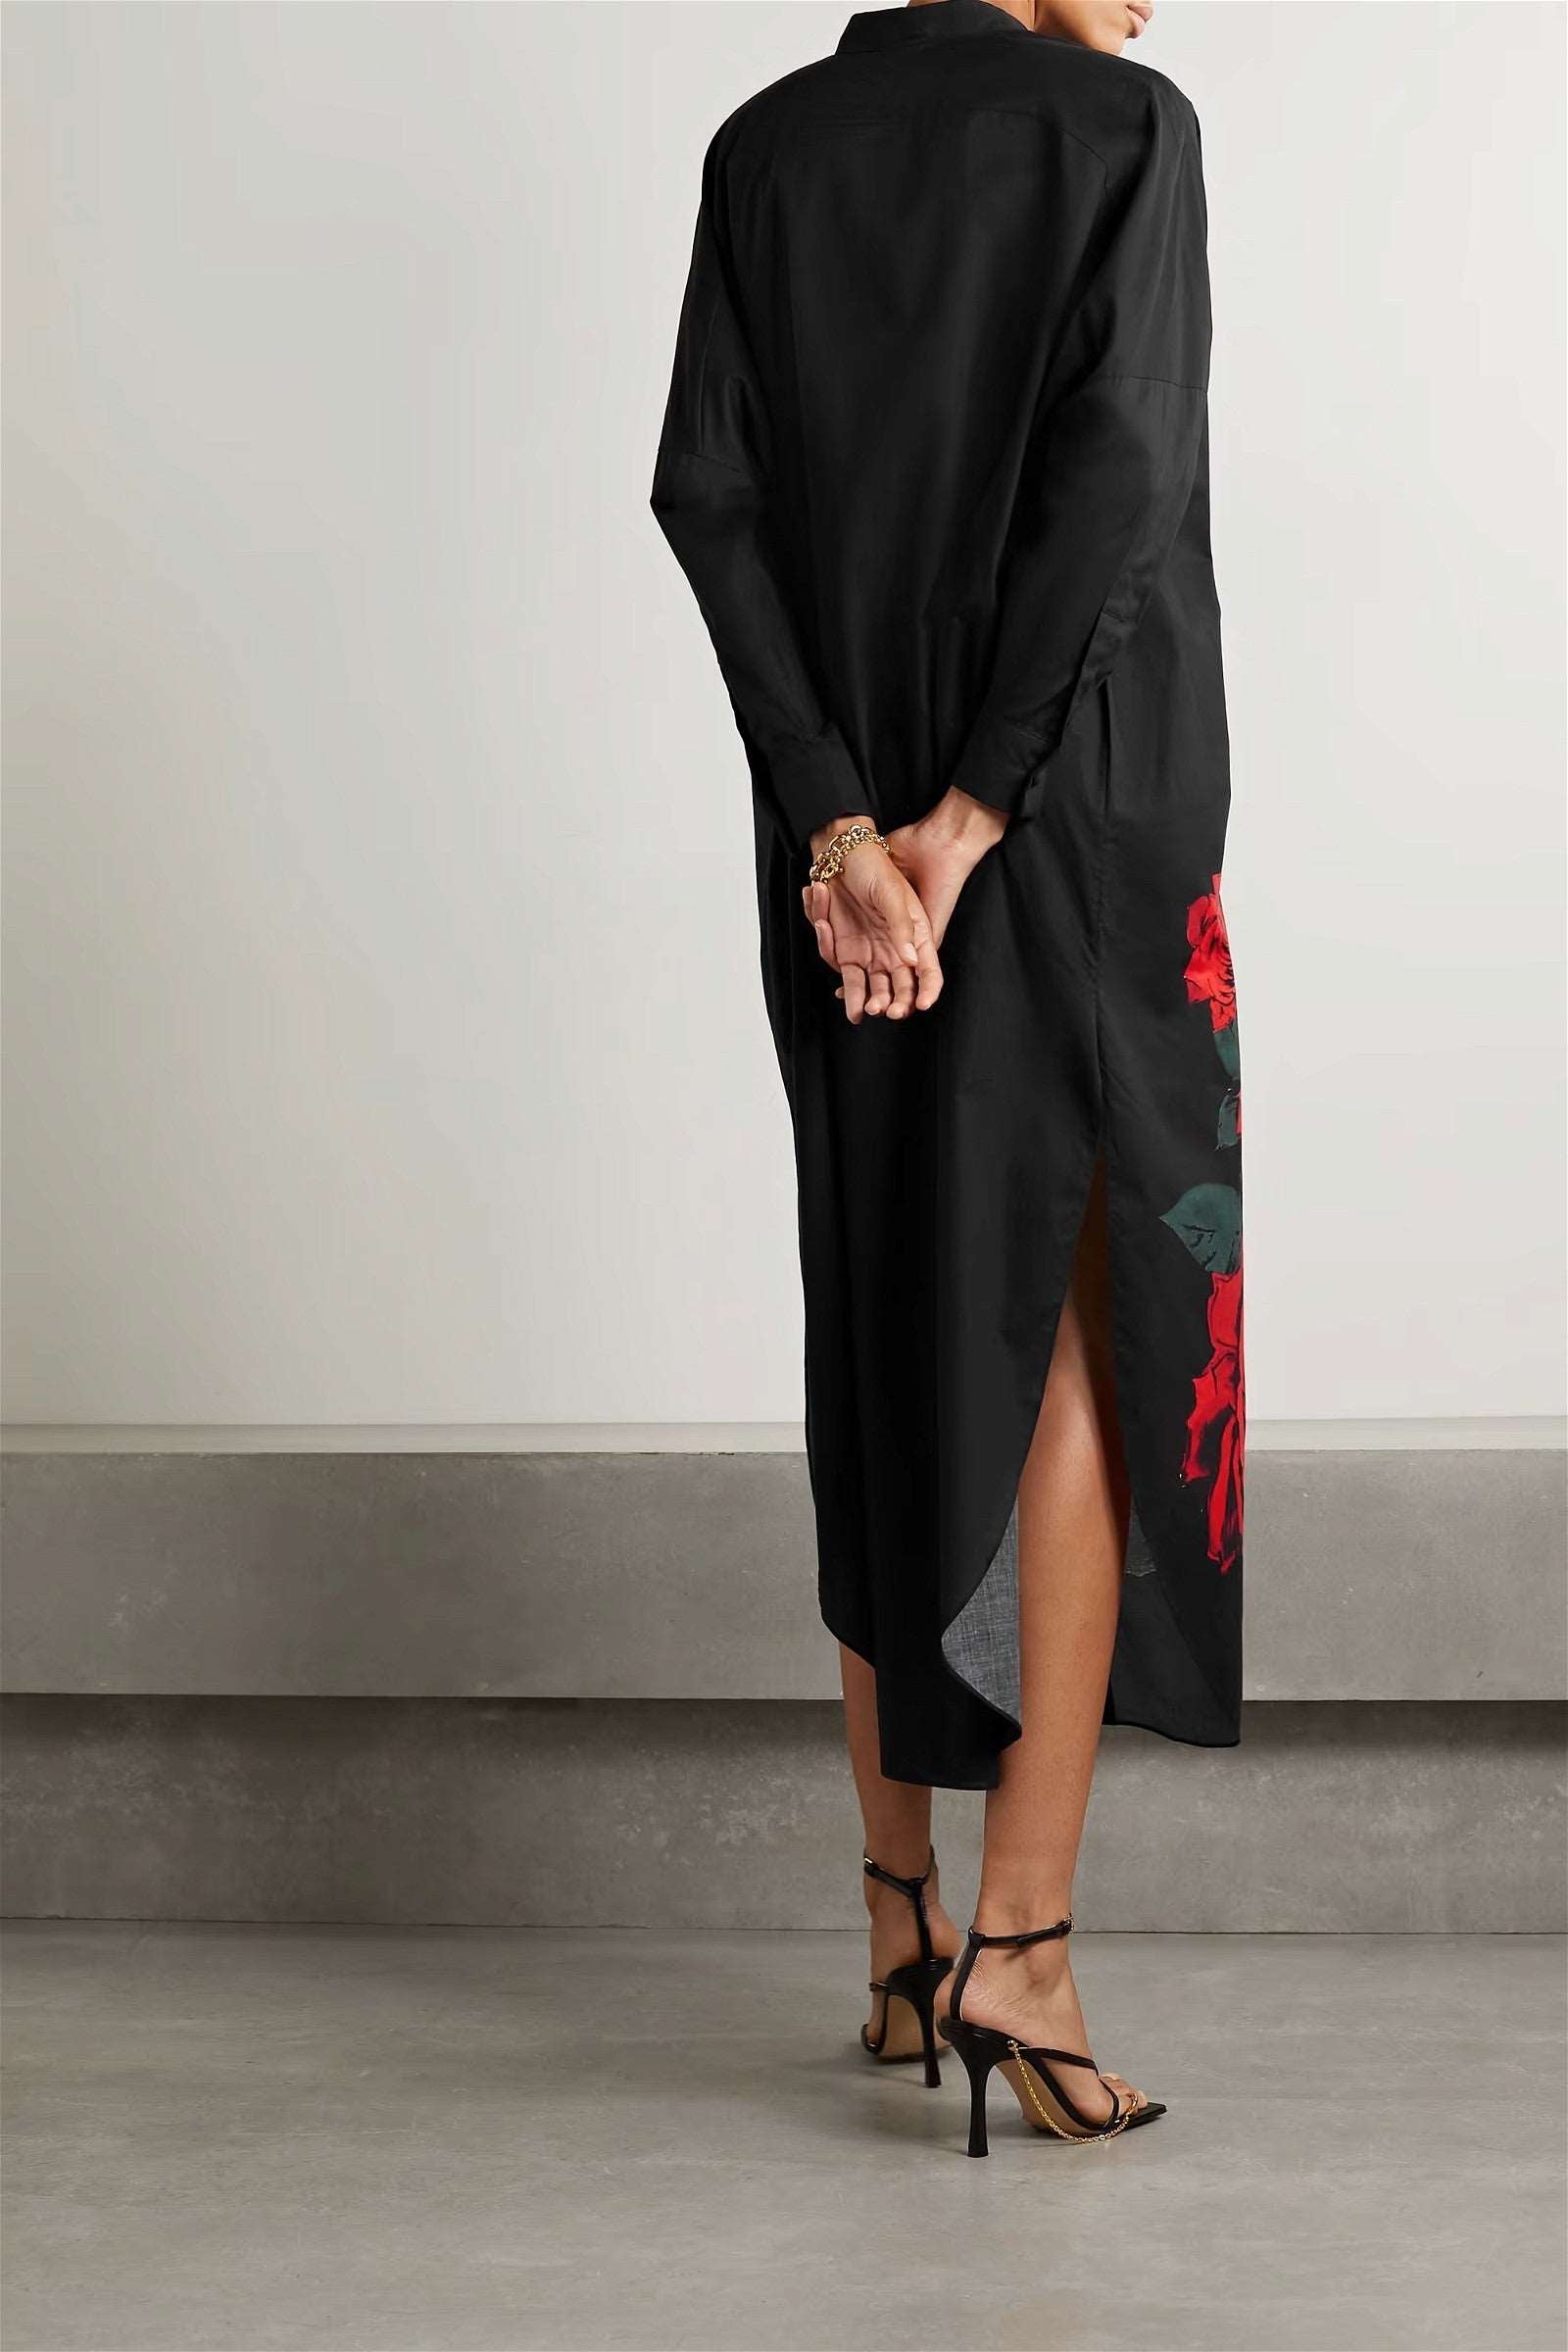 The model in the image is wearing Black And Red Rayon Cotton Party Style Dress For Women from Alice Milan. Crafted with the finest materials and impeccable attention to detail, the Partywear Dress looks premium, trendy, luxurious and offers unparalleled comfort. It’s a perfect clothing option for loungewear, resort wear, party wear or for an airport look. The woman in the image looks happy, and confident with her style statement putting a happy smile on her face.